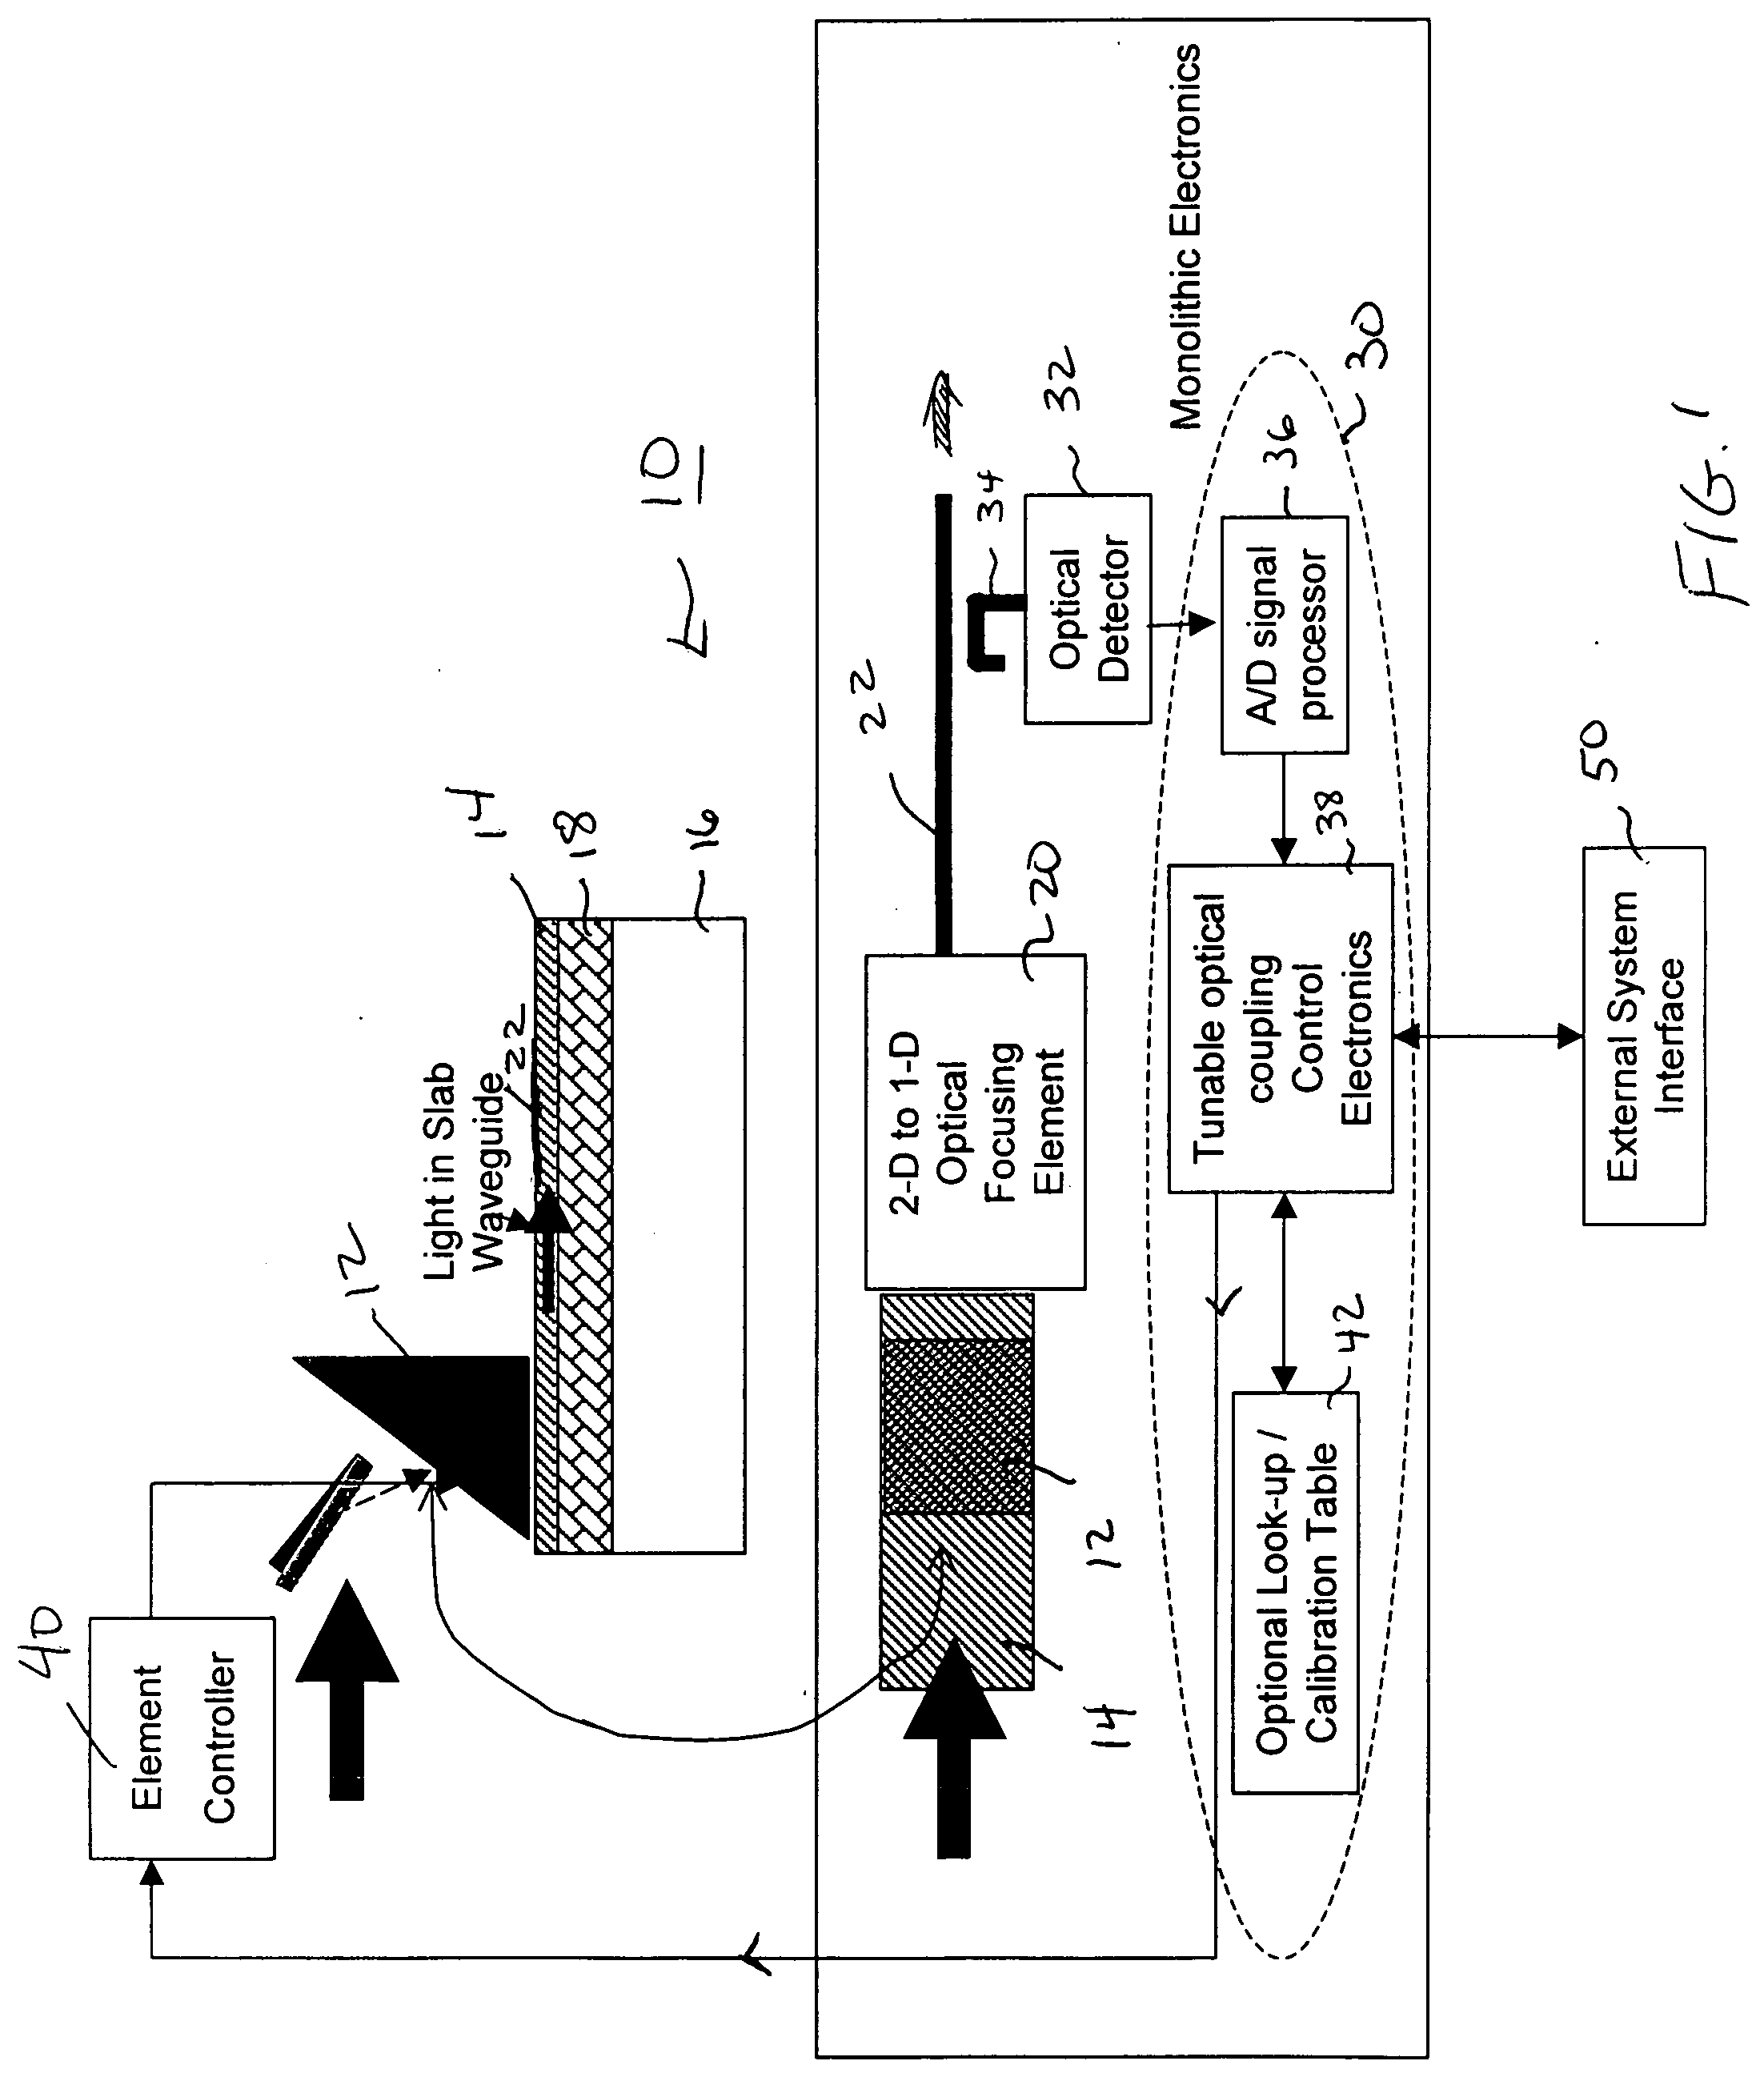 Optical detector configuration and utilization as feedback control in monolithic integrated optic and electronic arrangements